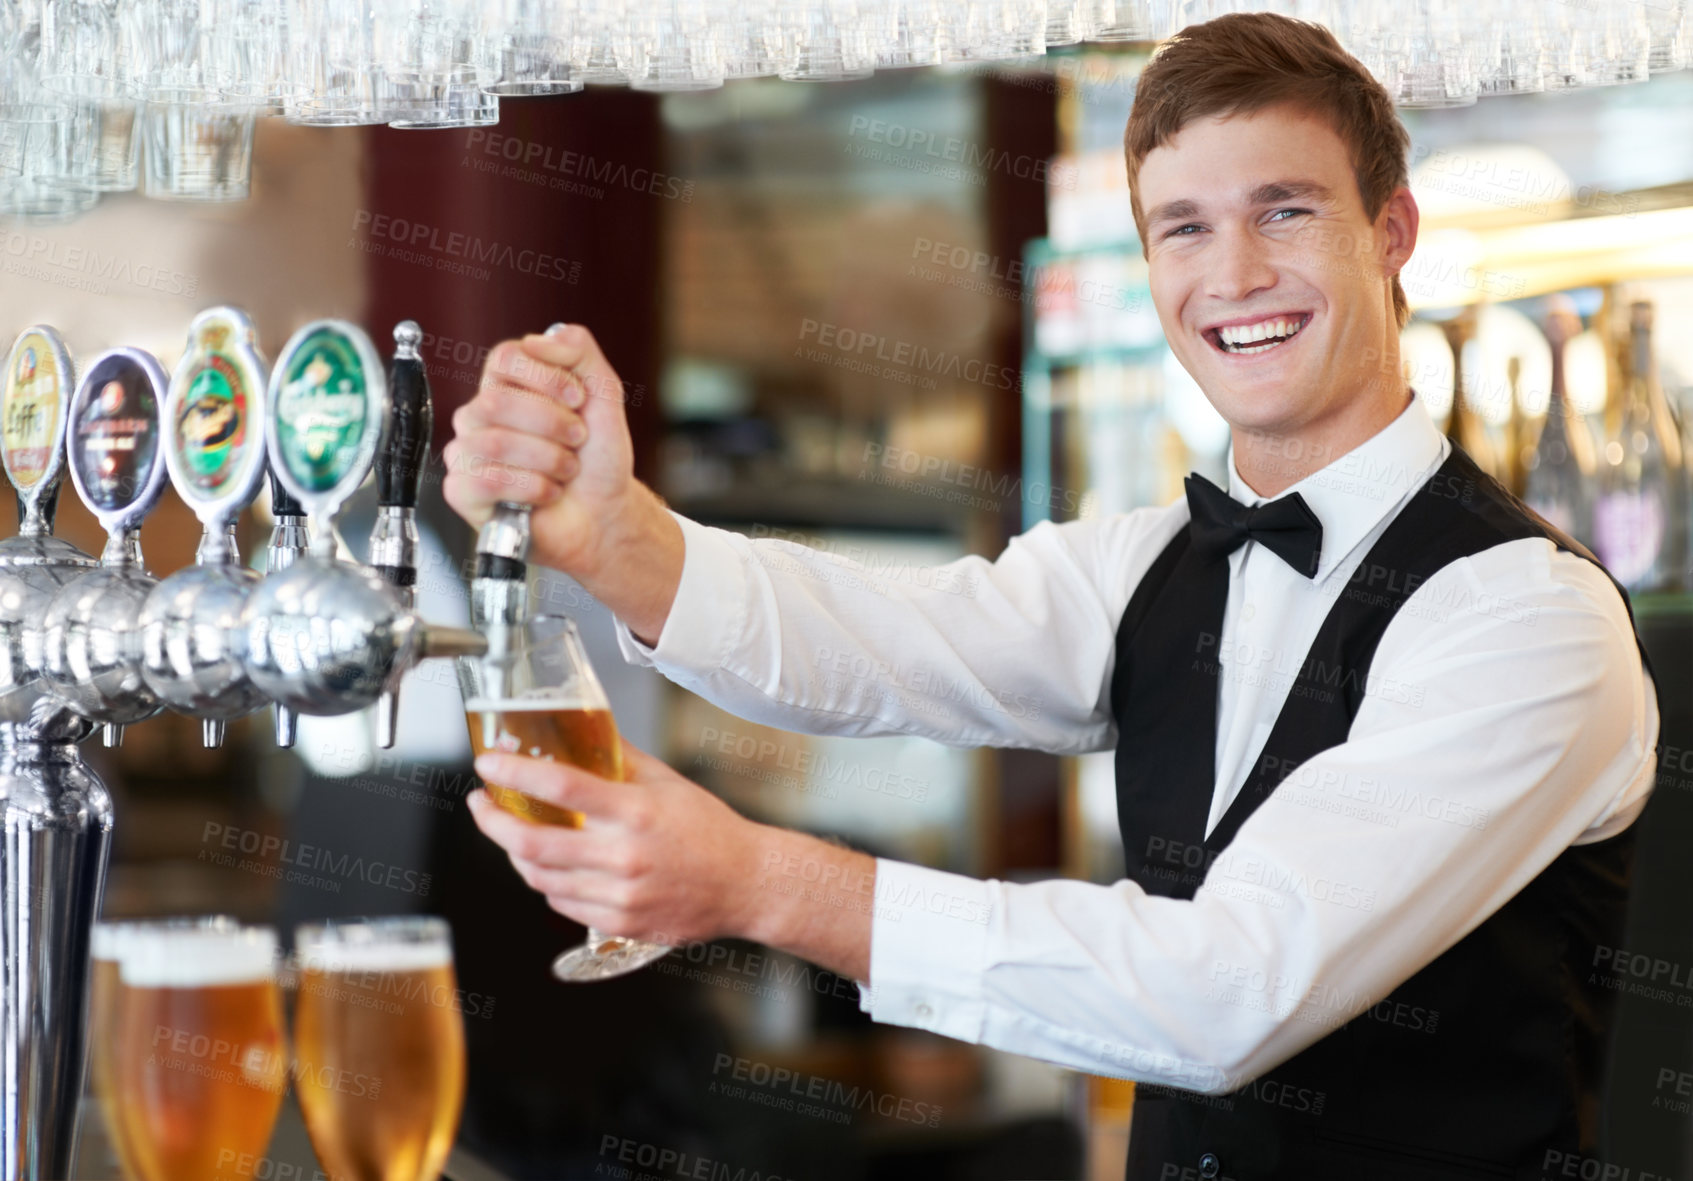 Buy stock photo Barman, happy and portrait with glass, beer or drink service for welcome, help or customer experience. Waiter, bartender or person with smile, container or alcohol at nightclub, pub or restaurant